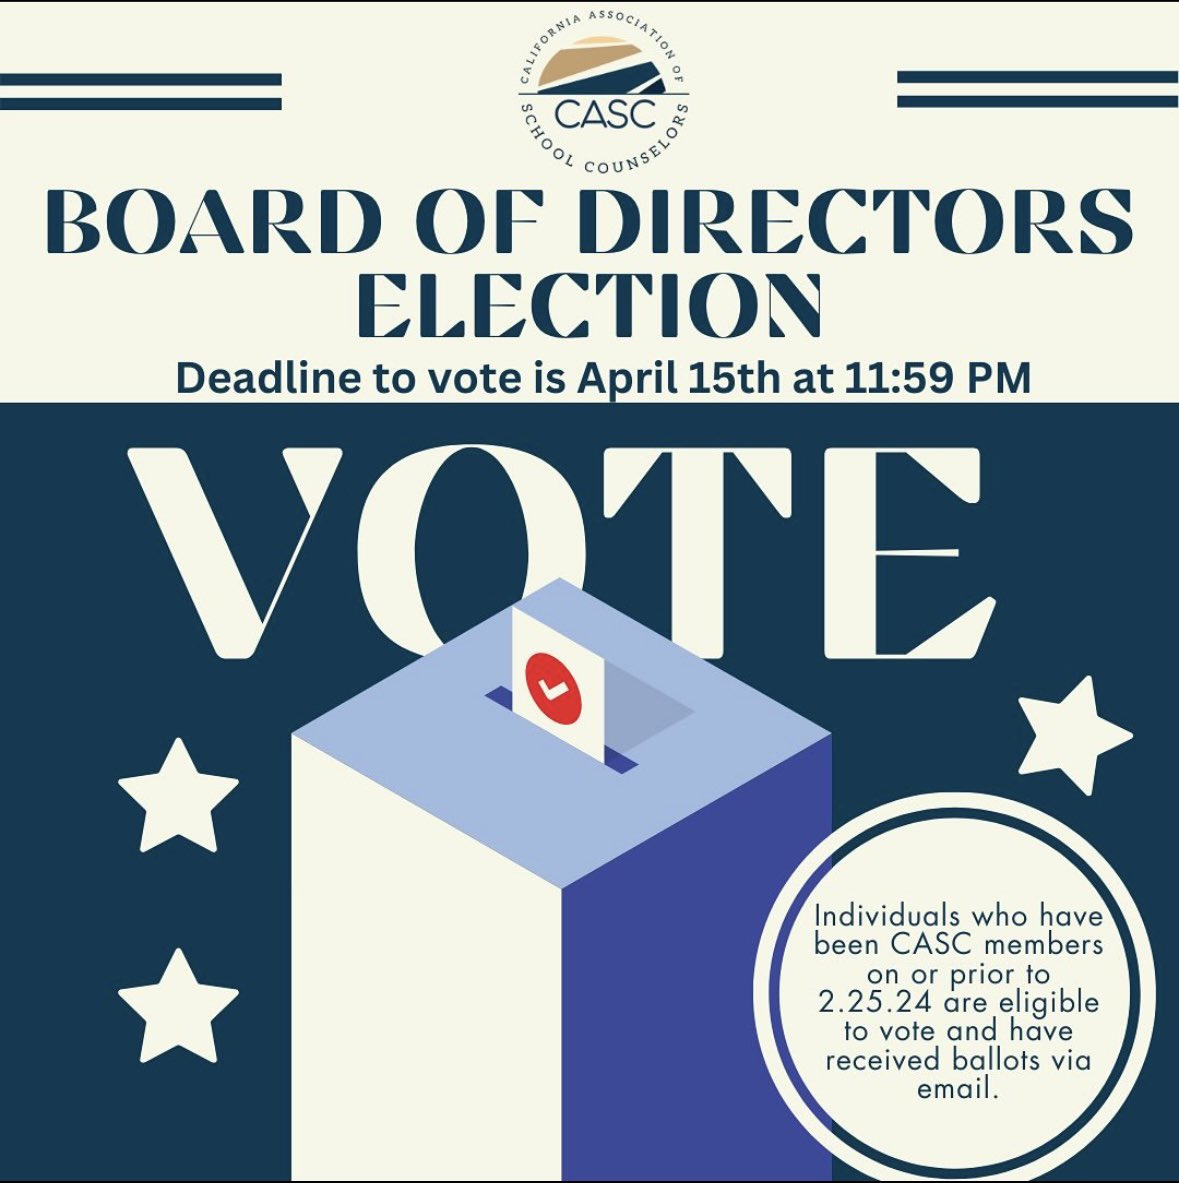 🚨CASC members🚨If you have been a CASC member on or prior to 2.25.24, you have received a ballot for the 2024 CASC Board of Directors Election. There are 16 candidates vying for 6 seats. Review the ballot with each candidate’s information. Deadline to vote is 4/15 at 11:59 PM.